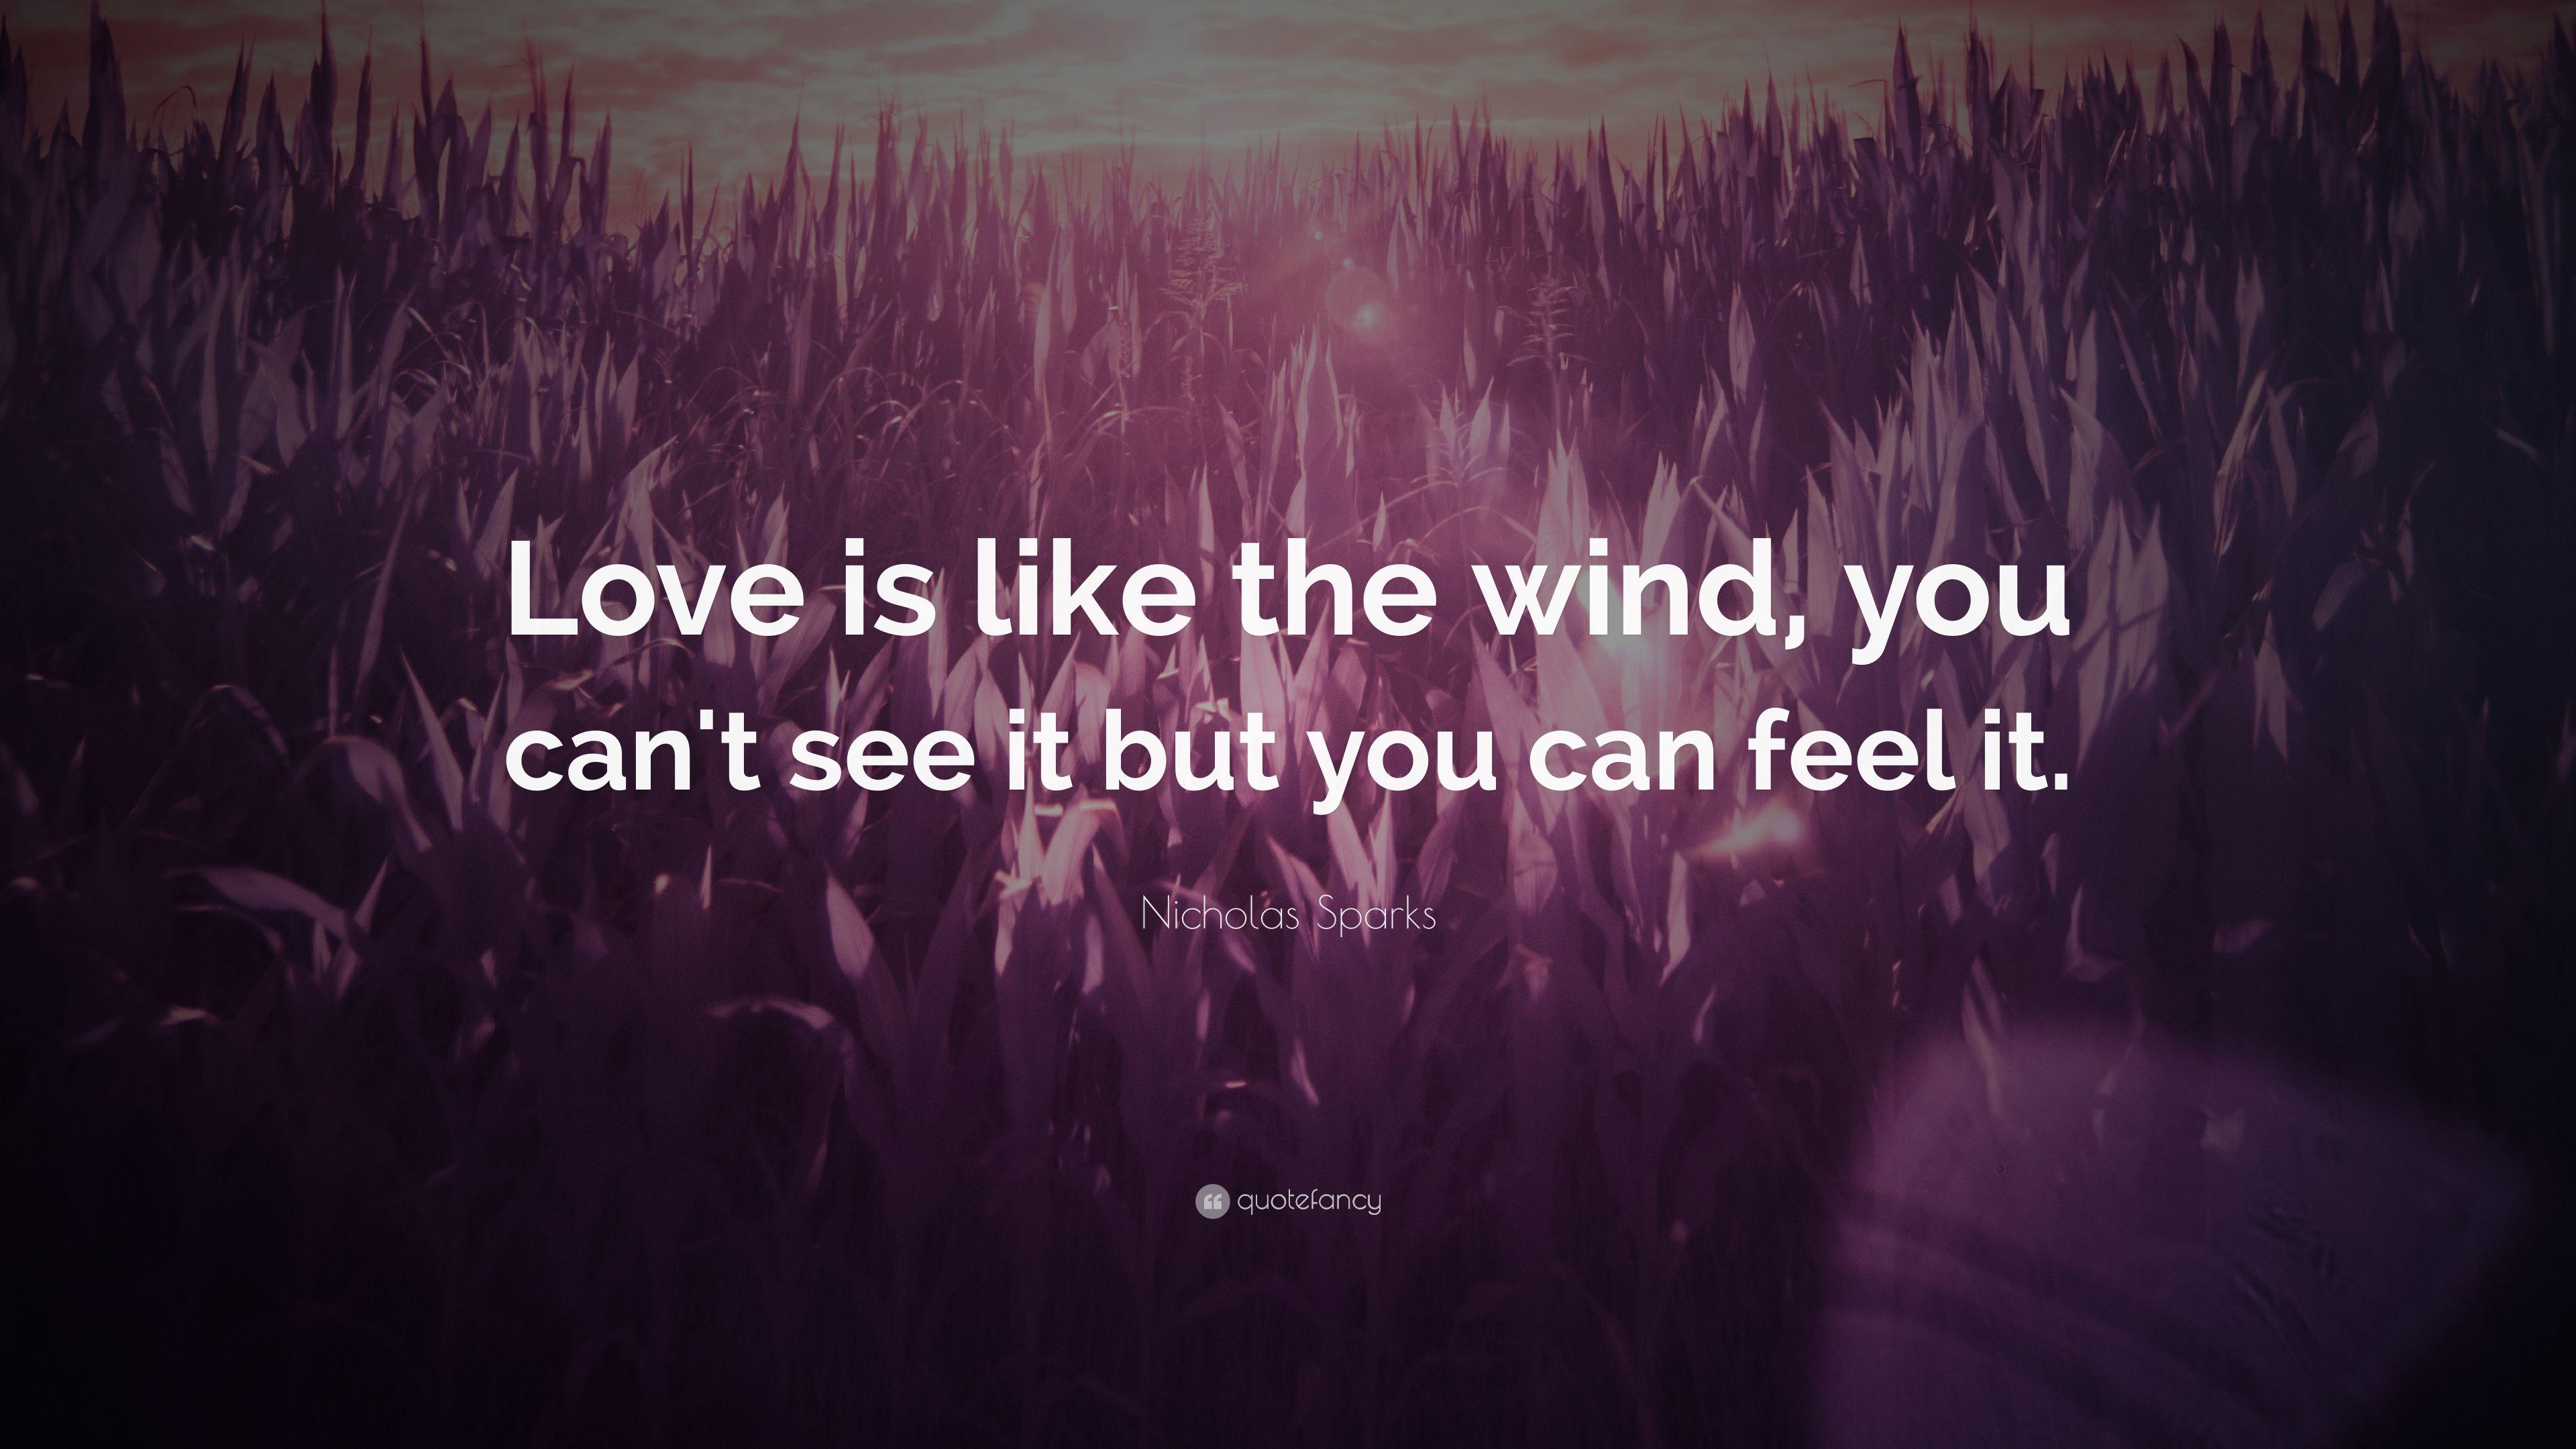 Nicholas Sparks Quote: "Love is like the wind, you can't see it b...